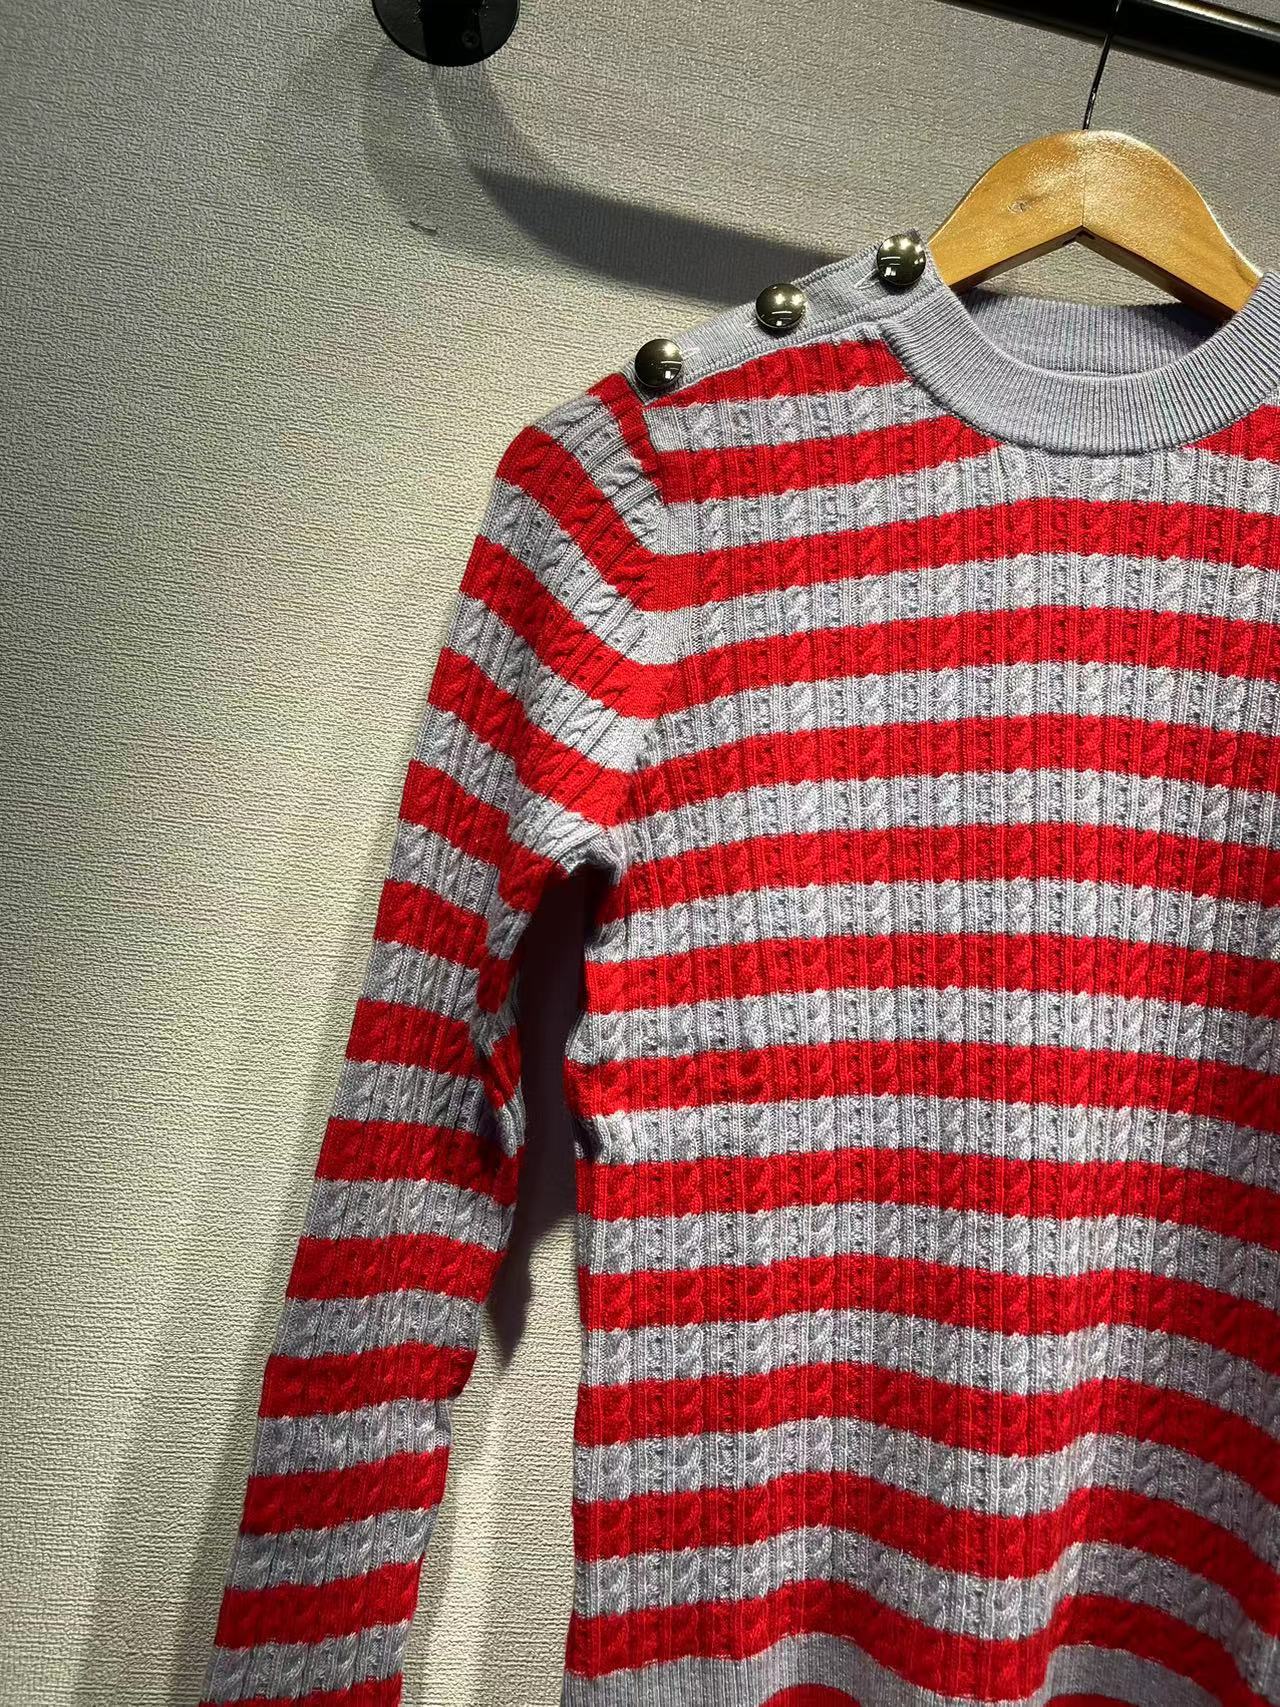 Women's Striped Wool Blended Woven Round Neck Long Sweaters